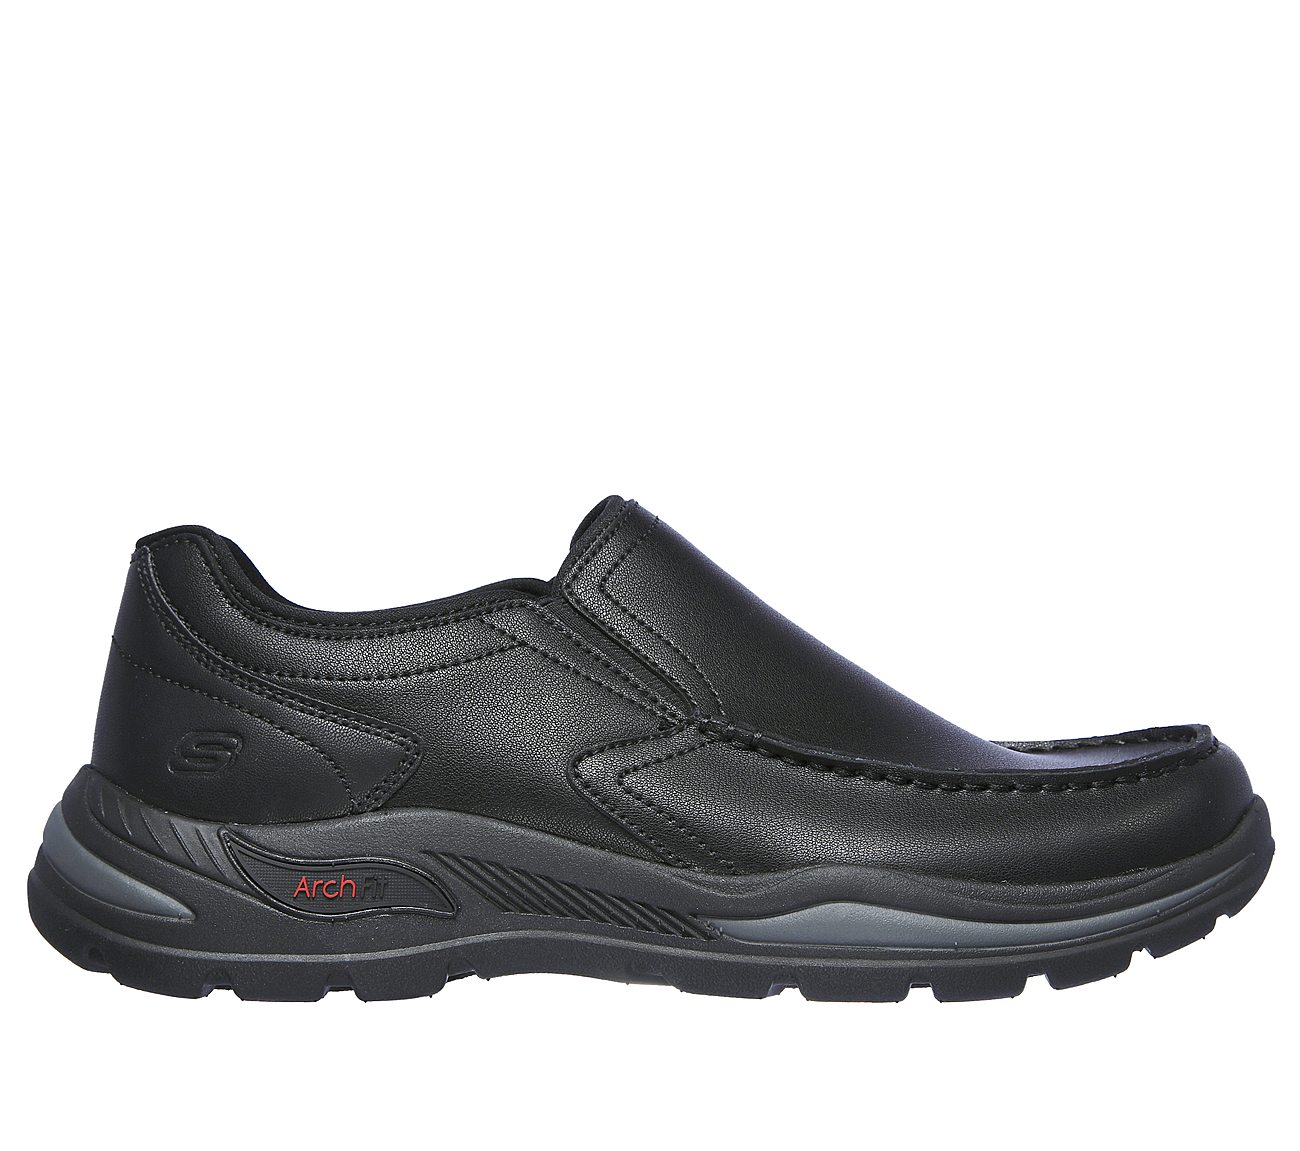 skechers all leather shoes